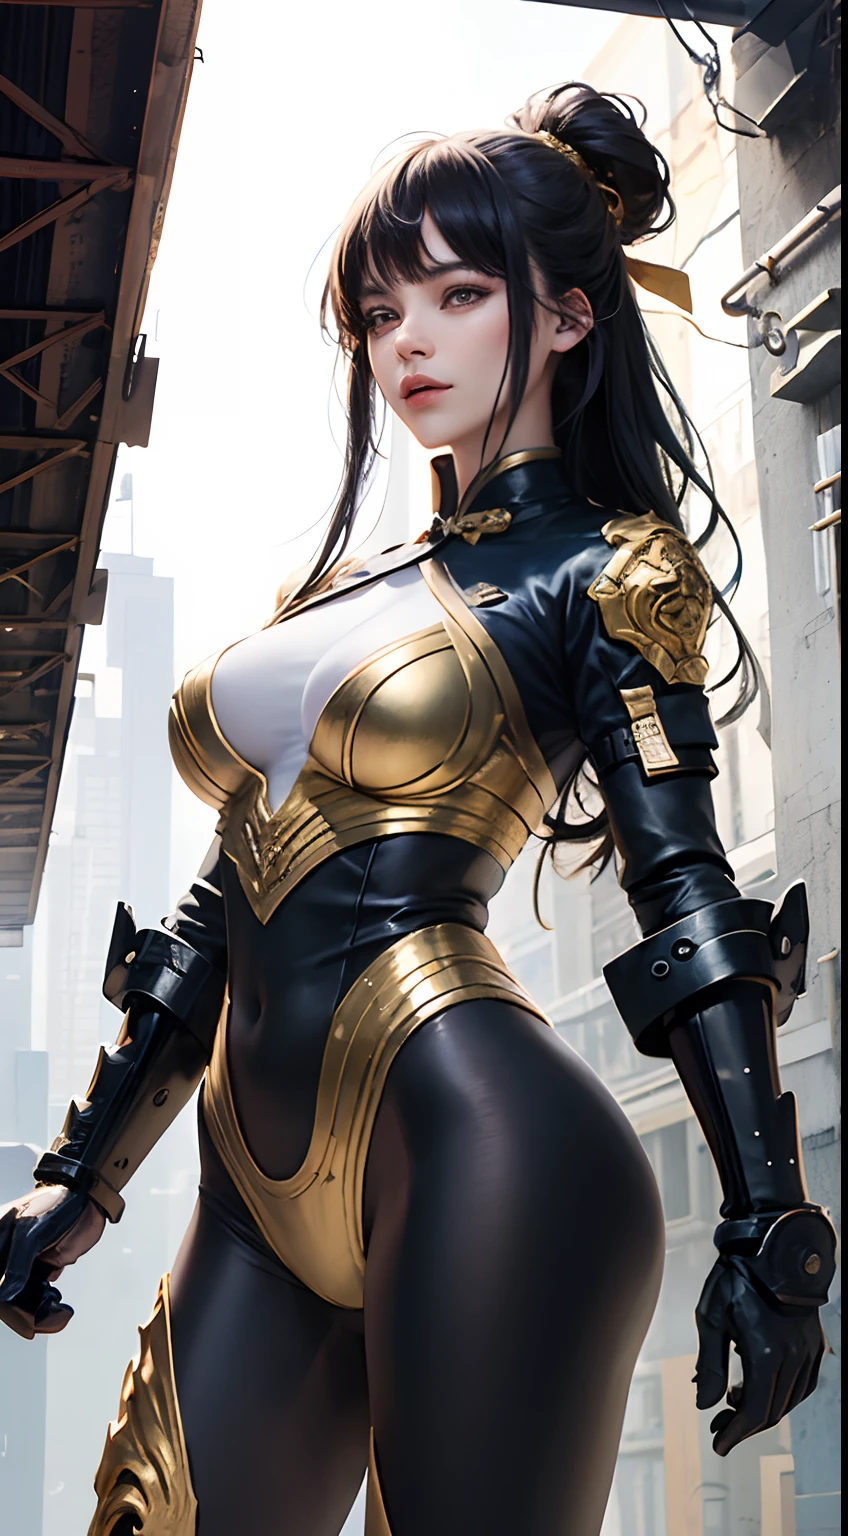 （tmasterpiece，top Quority，best qualtiy，offcial art，Beautiful and aesthetic：1.2），（1girl huge large breasts），waist - up，Tang suit，Hanfu，cyber punk style，mechs，Extremely detailed，Colorful，highestdetailed，offcial art，Unity 8k wallpaper，Ultra-detail，Beautiful and aesthetic，beatifull，tmasterpiece，best qualtiy，（zentangle，a Mandala，Tangles，Entangled），Sacred Radiance，gold foil，Gold leaf art，glitter drawing，PerfectNwsjMajic、Longhaire